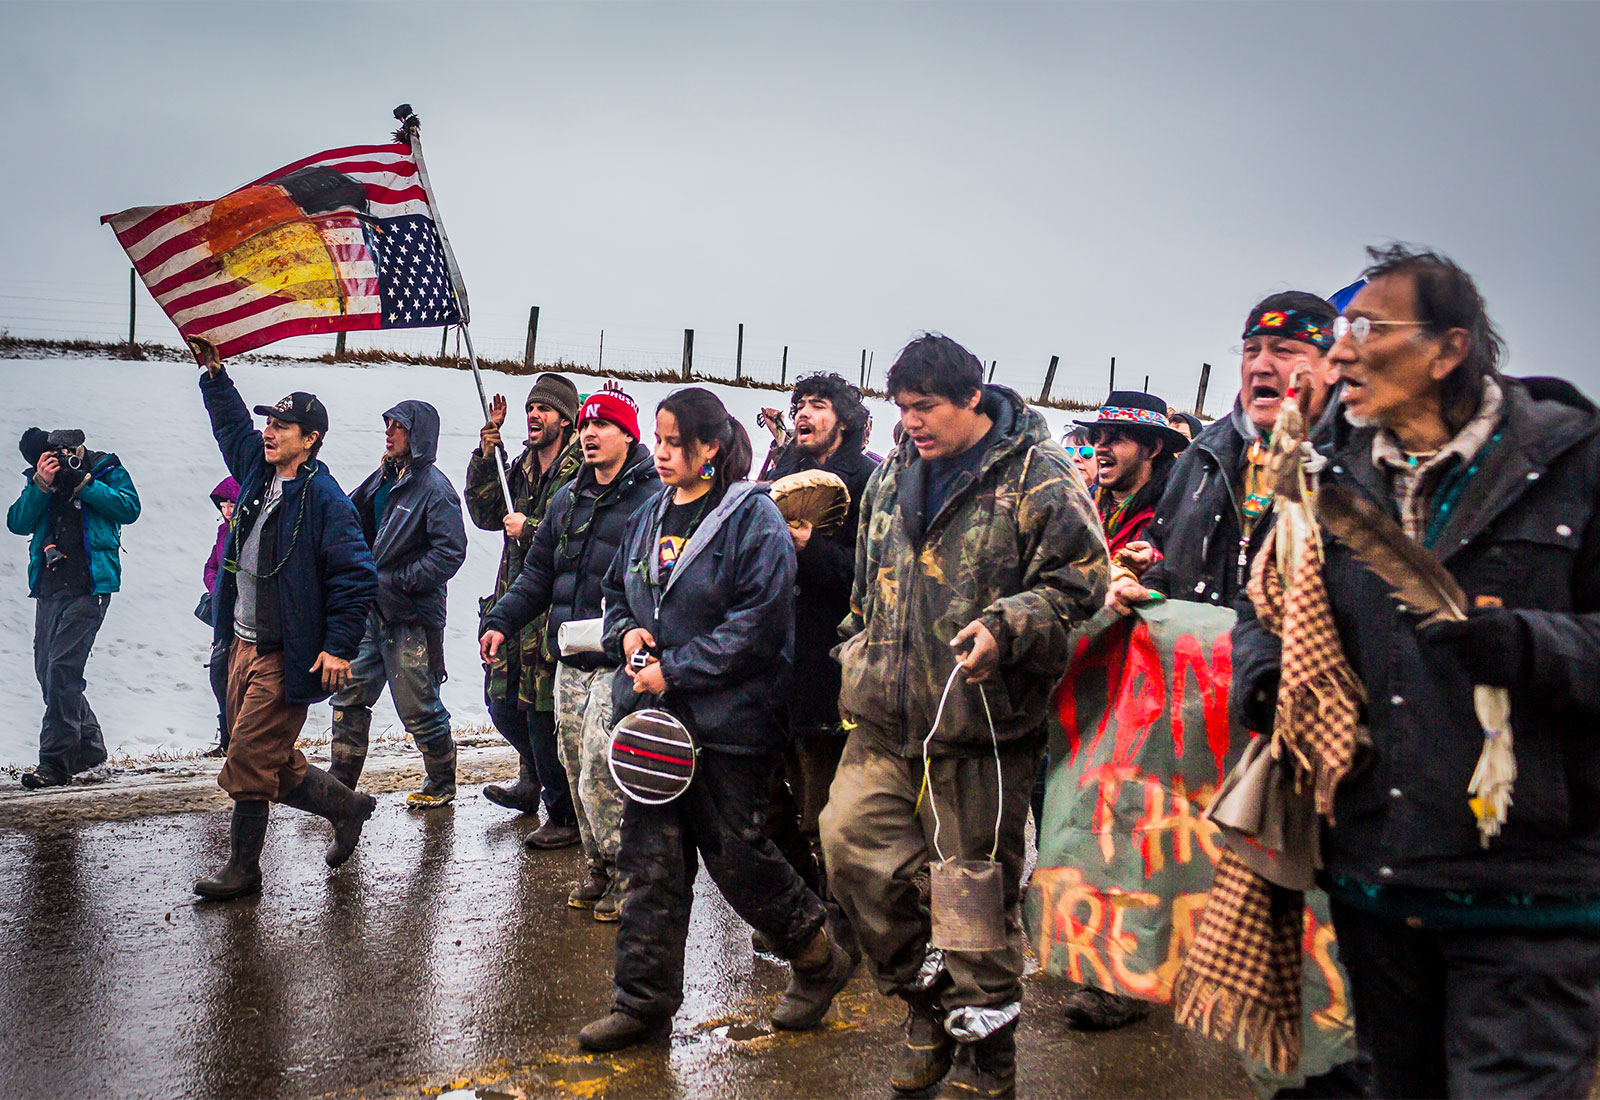 A large group of Indigenous people march and protest on a wet road on a snowy field